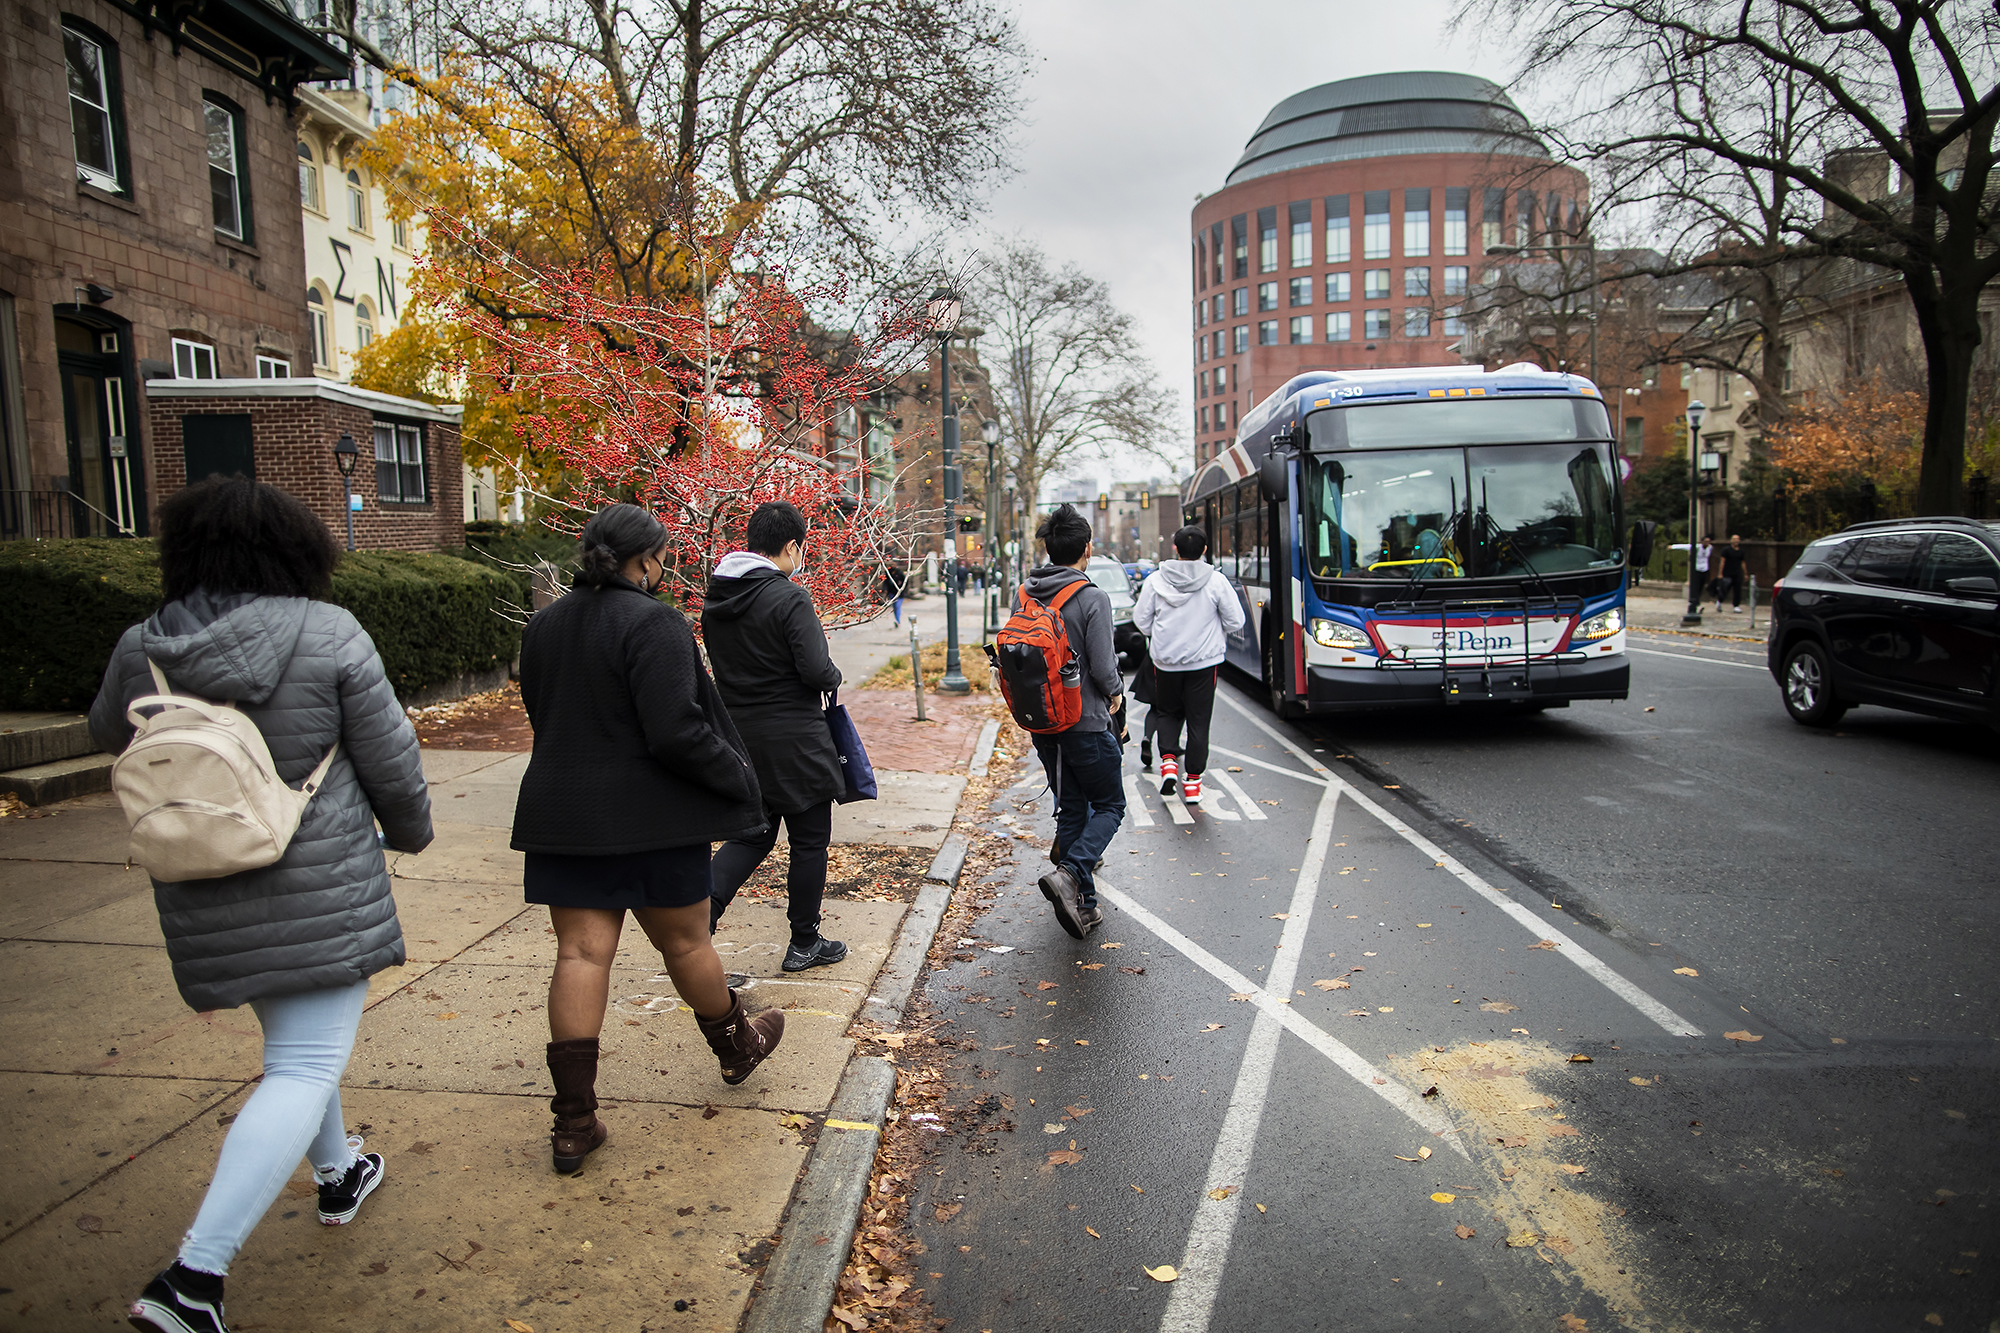 Students line up to get on a Penn charter bus